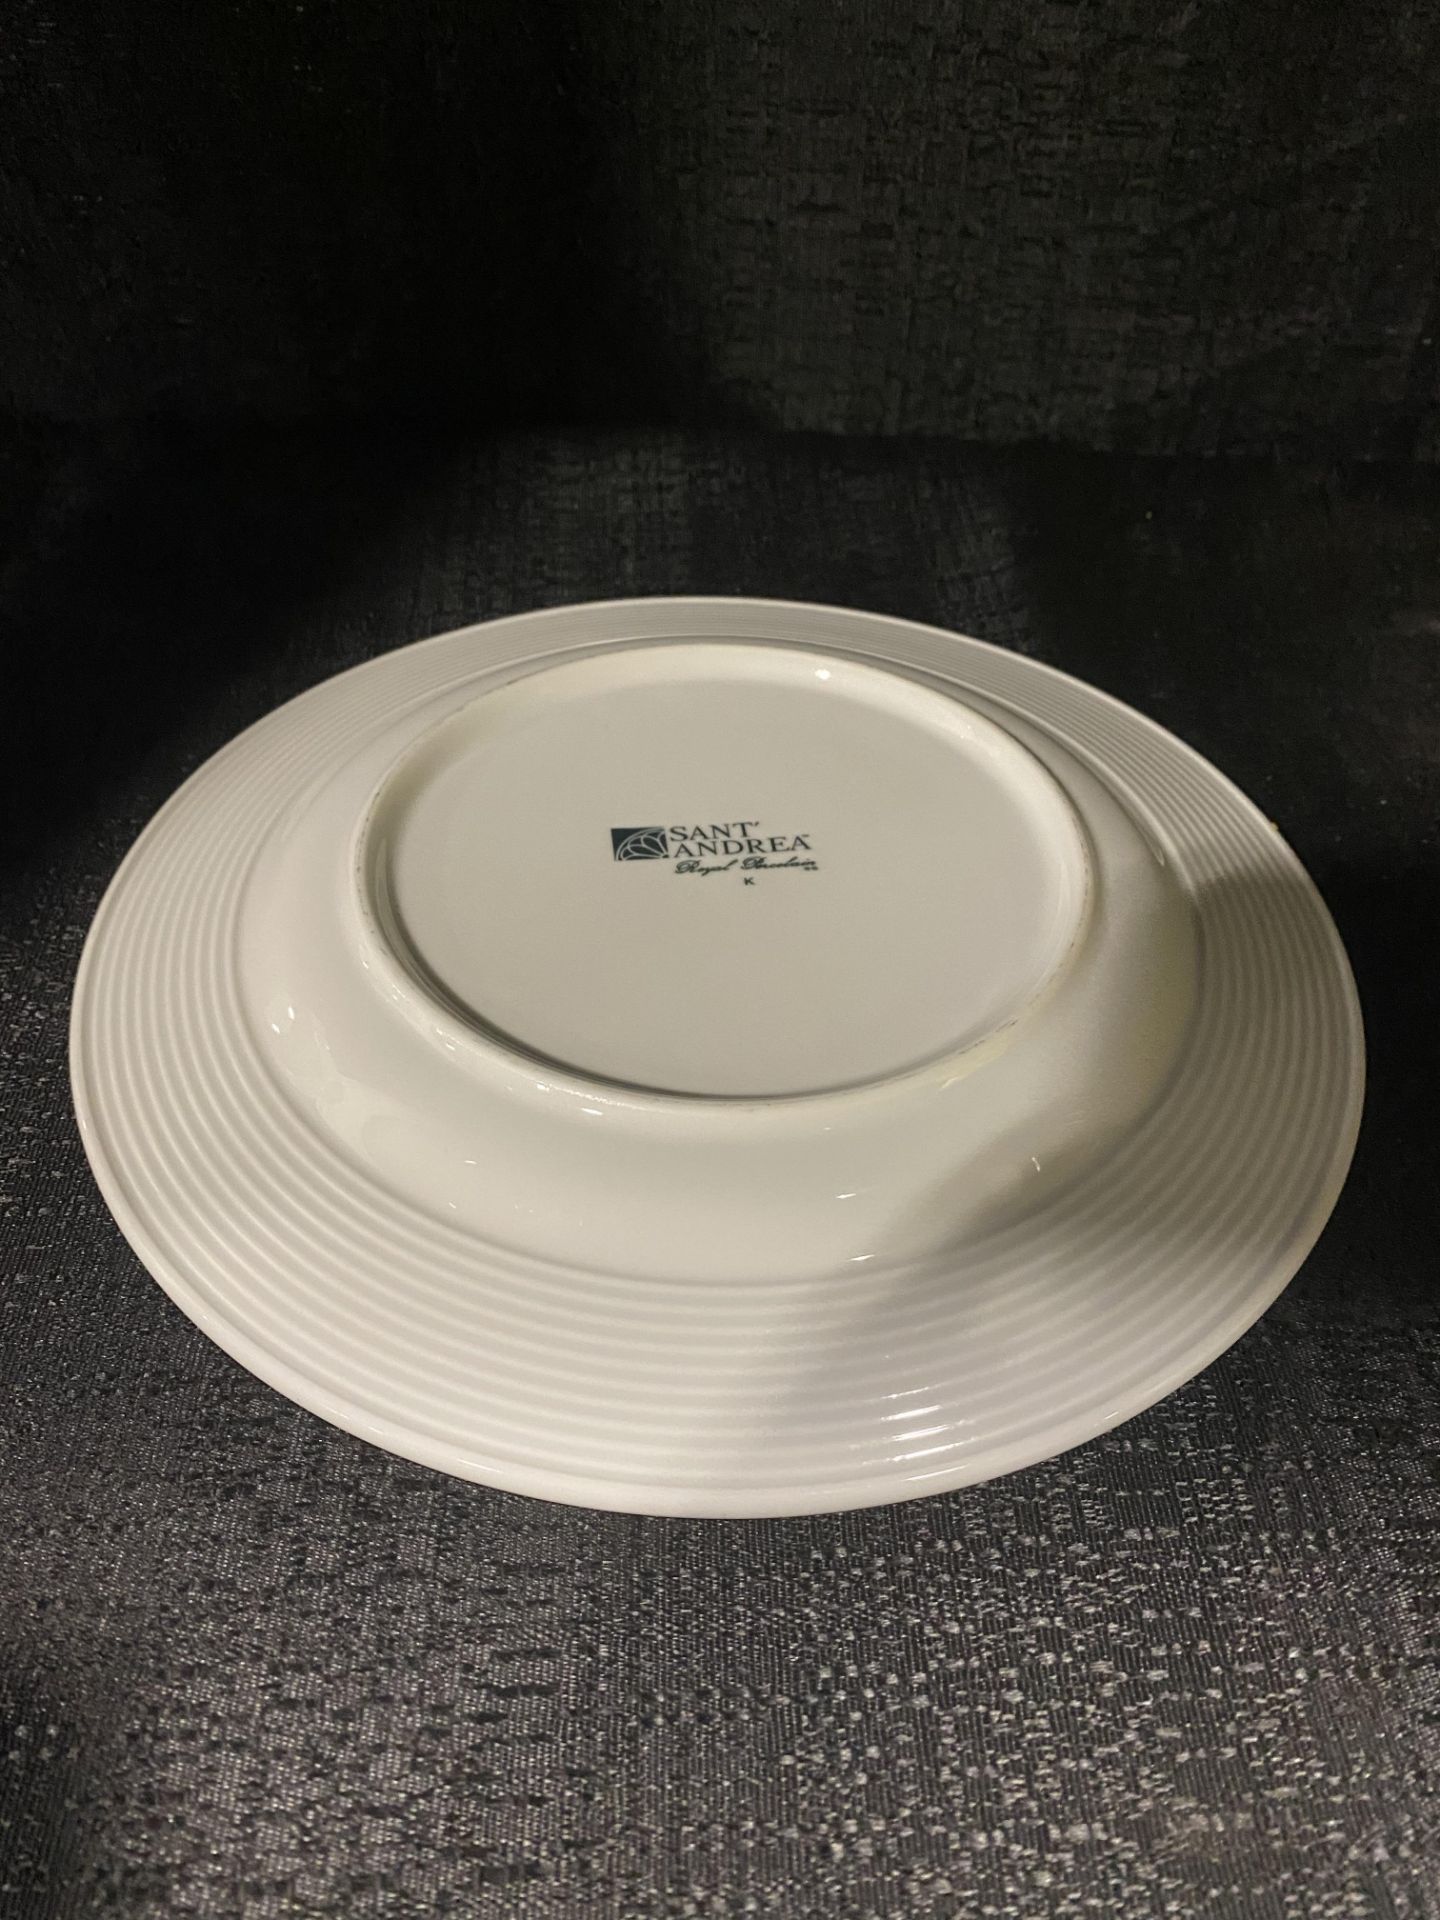 (300) 9.5" Salad/Dessert Plates White China Sant Andrea (BRING PACKING MATERIAL) - Image 3 of 3